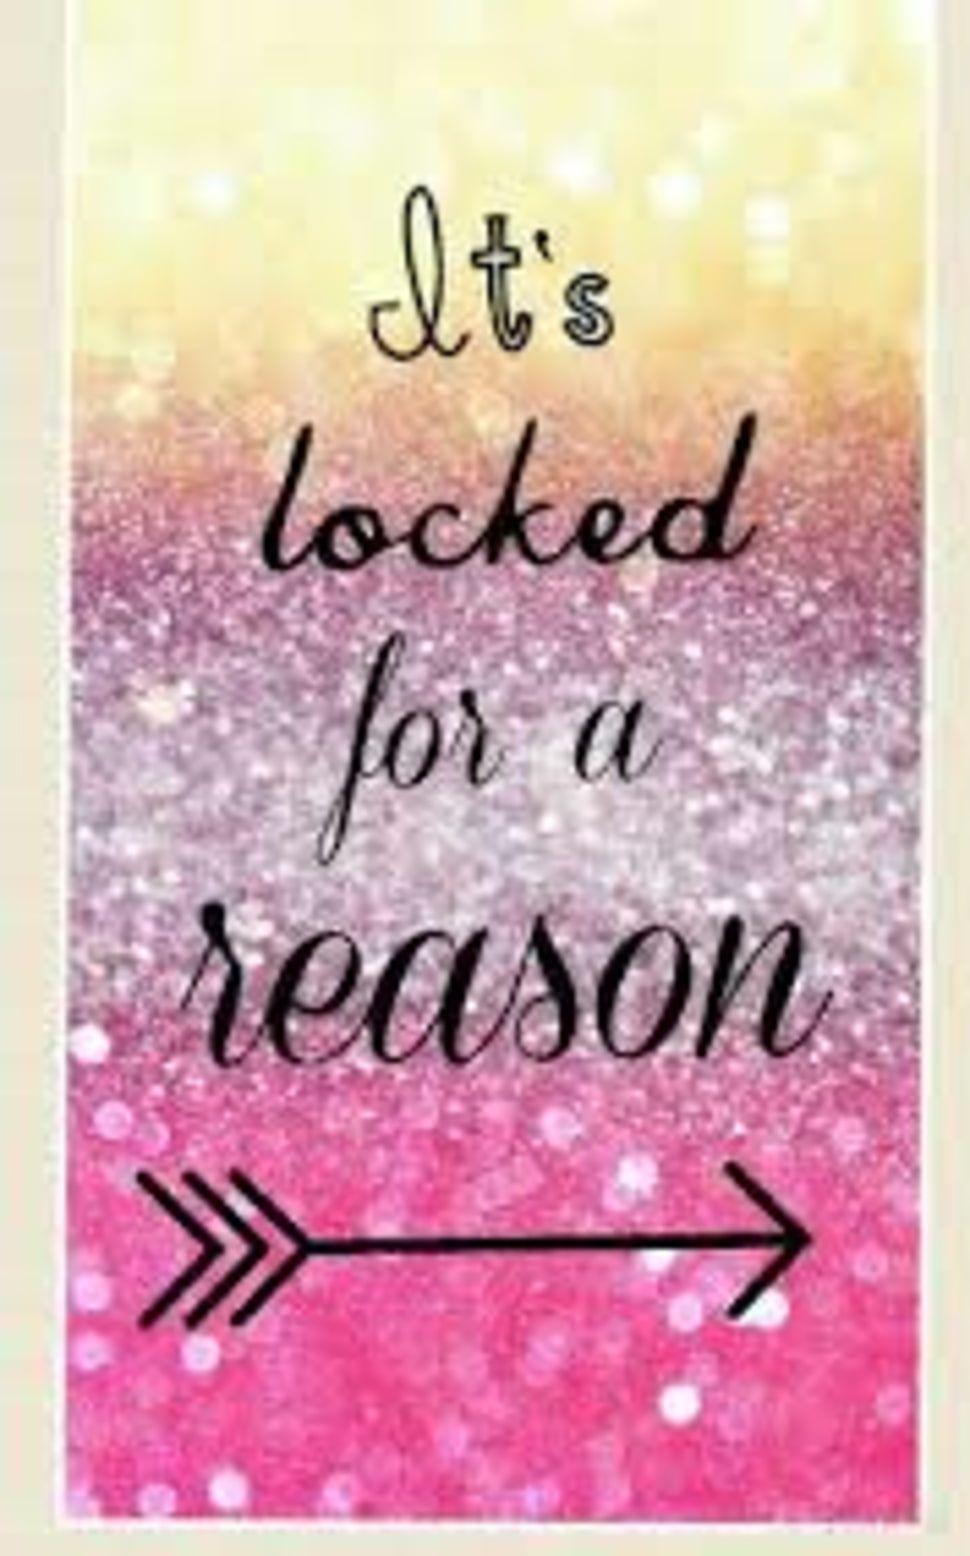 Girly Lock Screen Wallpaper APK 433 for Android  Download Girly Lock  Screen Wallpaper APK Latest Version from APKFabcom